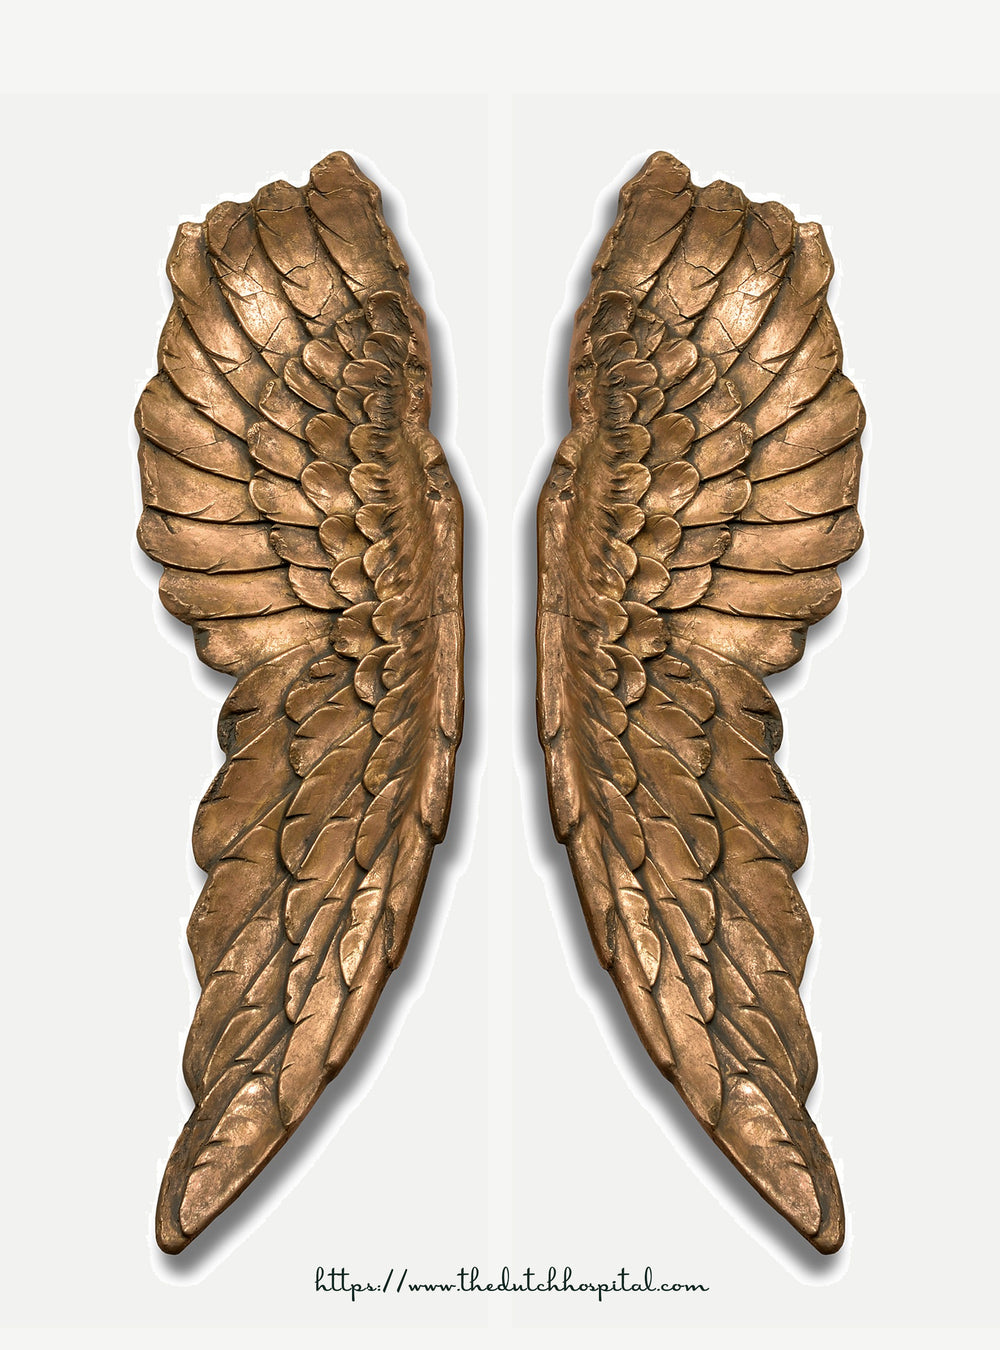 Large antique gold angel wings, pair of wings